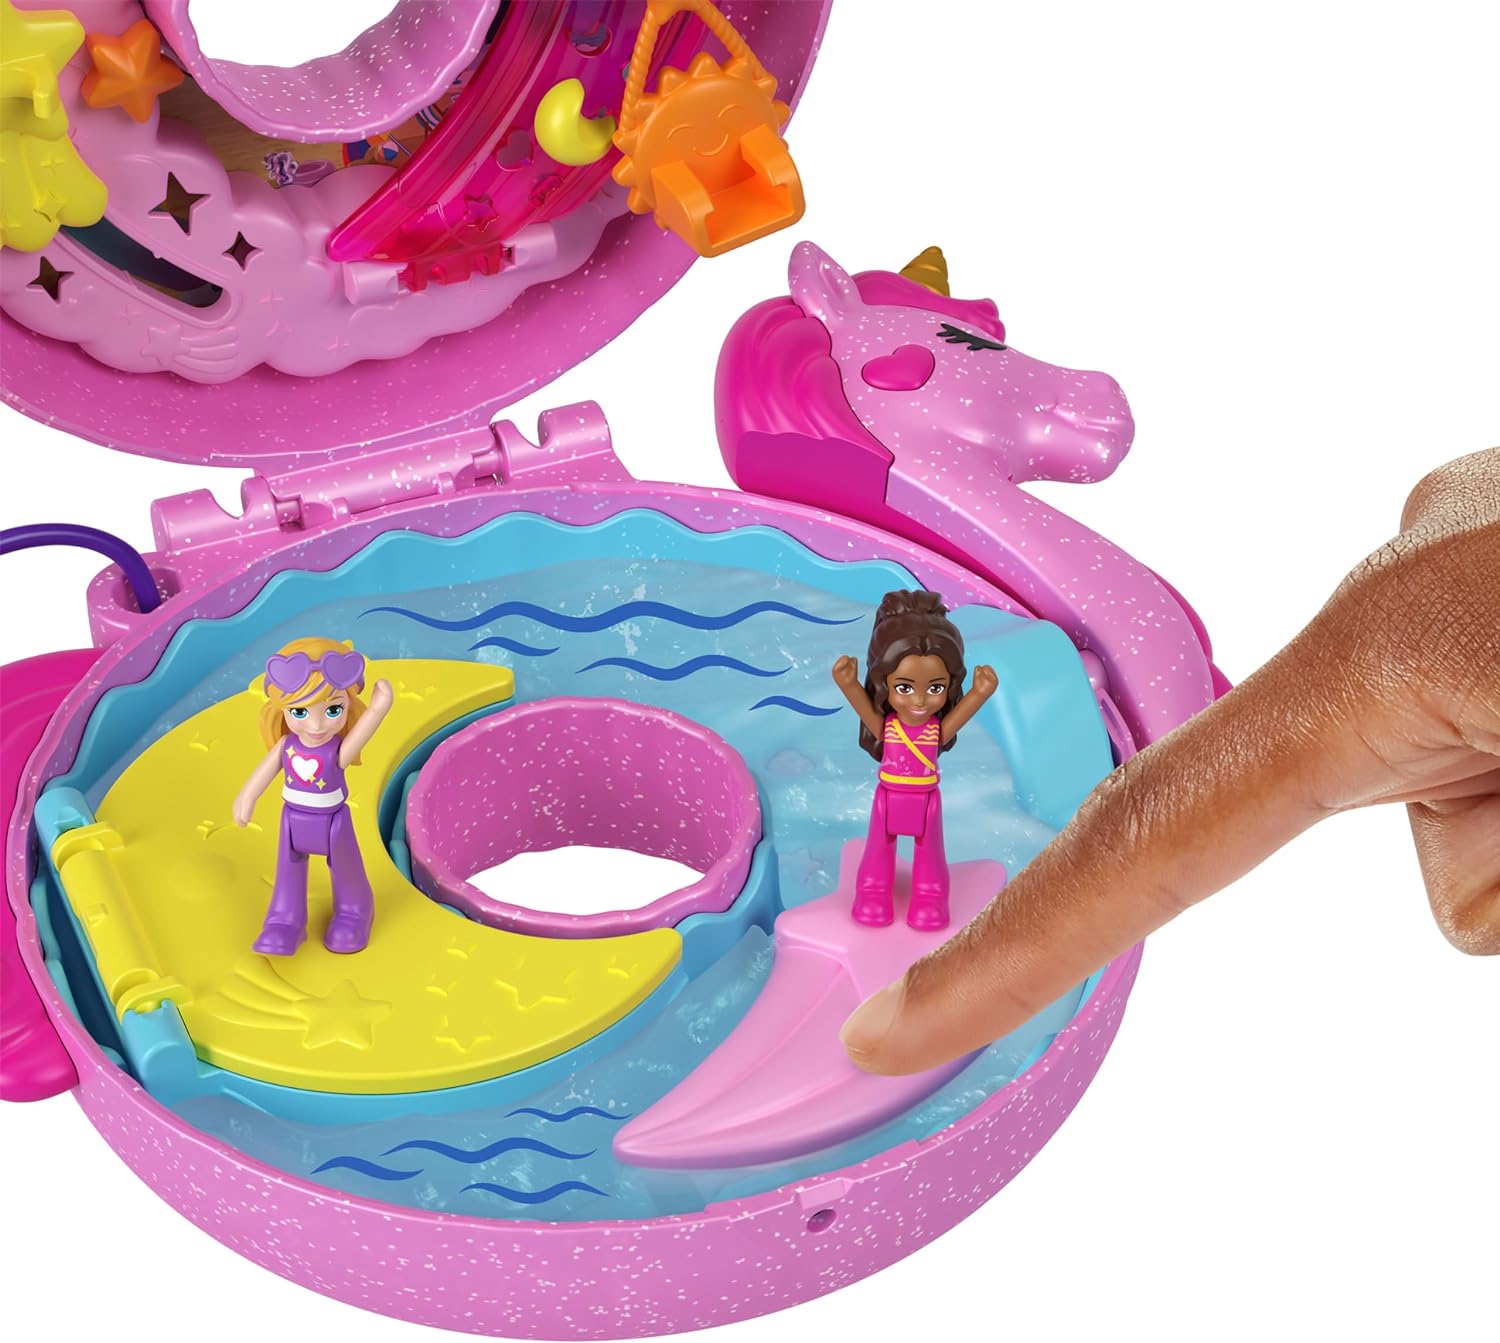 Polly Pocket Compact Playset, Jumpin' Style Pony with 2 Micro Dolls &  Accessories, Travel Toys with Surprise Reveals